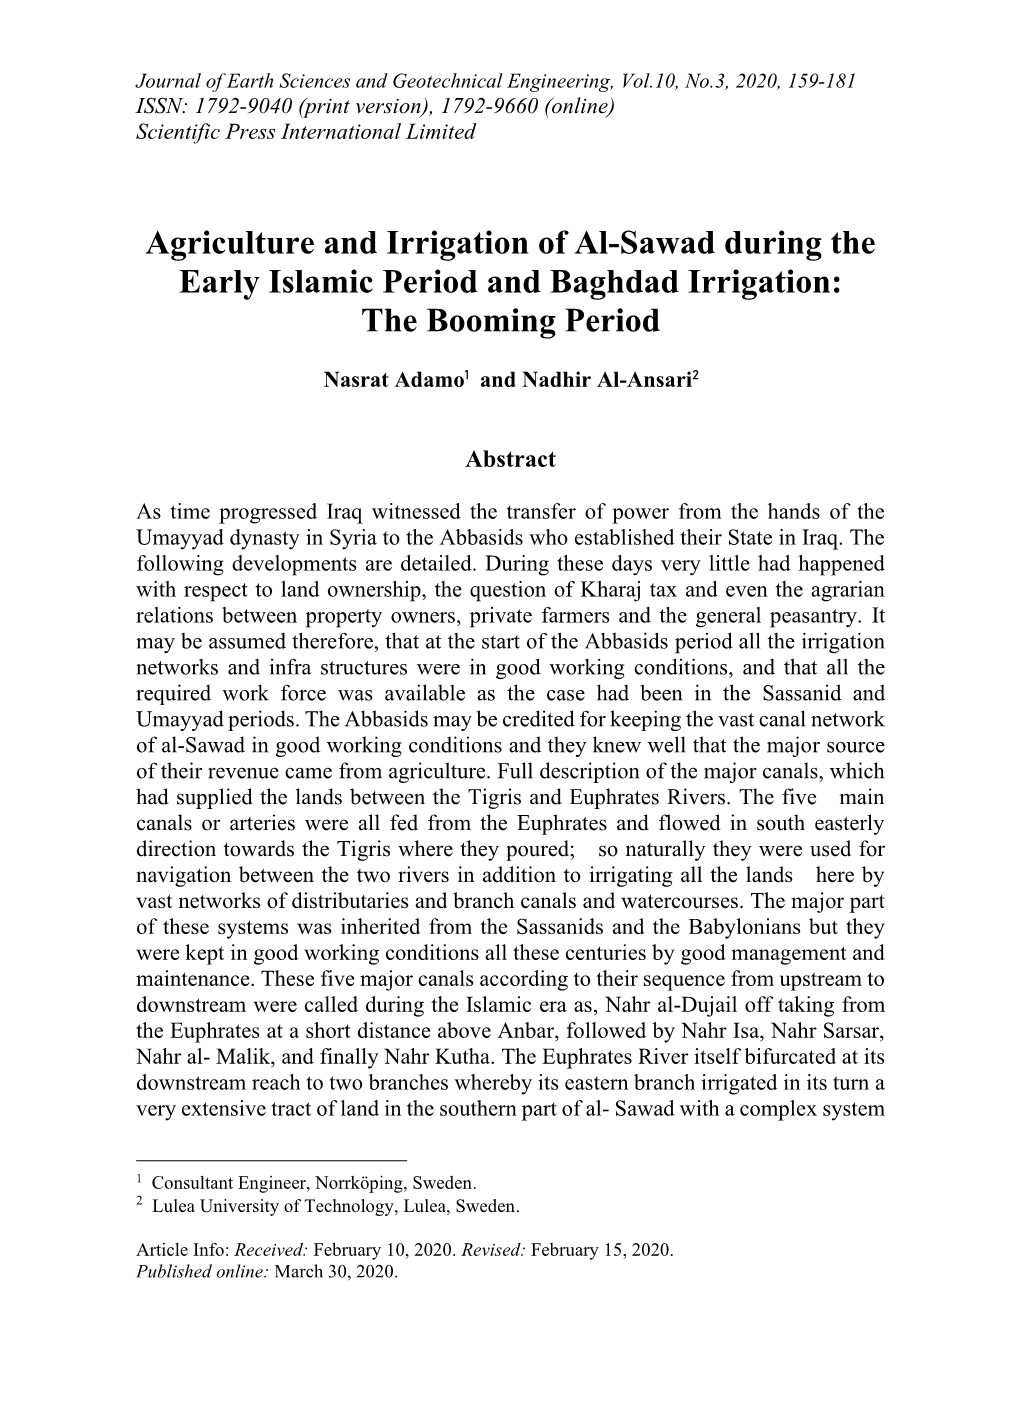 Agriculture and Irrigation of Al-Sawad During the Early Islamic Period and Baghdad Irrigation: the Booming Period